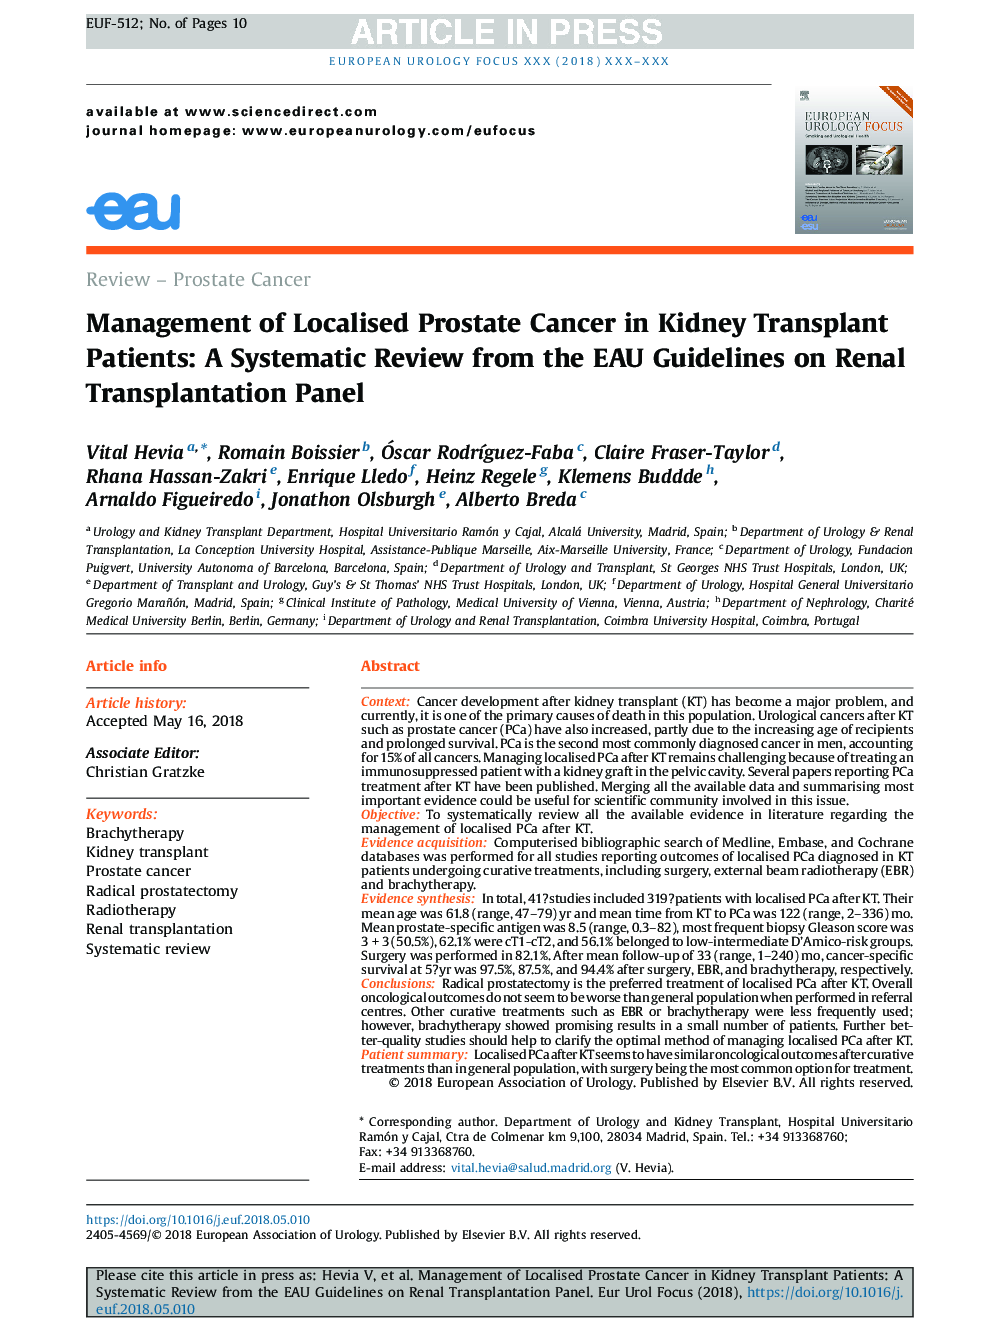 Management of Localised Prostate Cancer in Kidney Transplant Patients: A Systematic Review from the EAU Guidelines on Renal Transplantation Panel